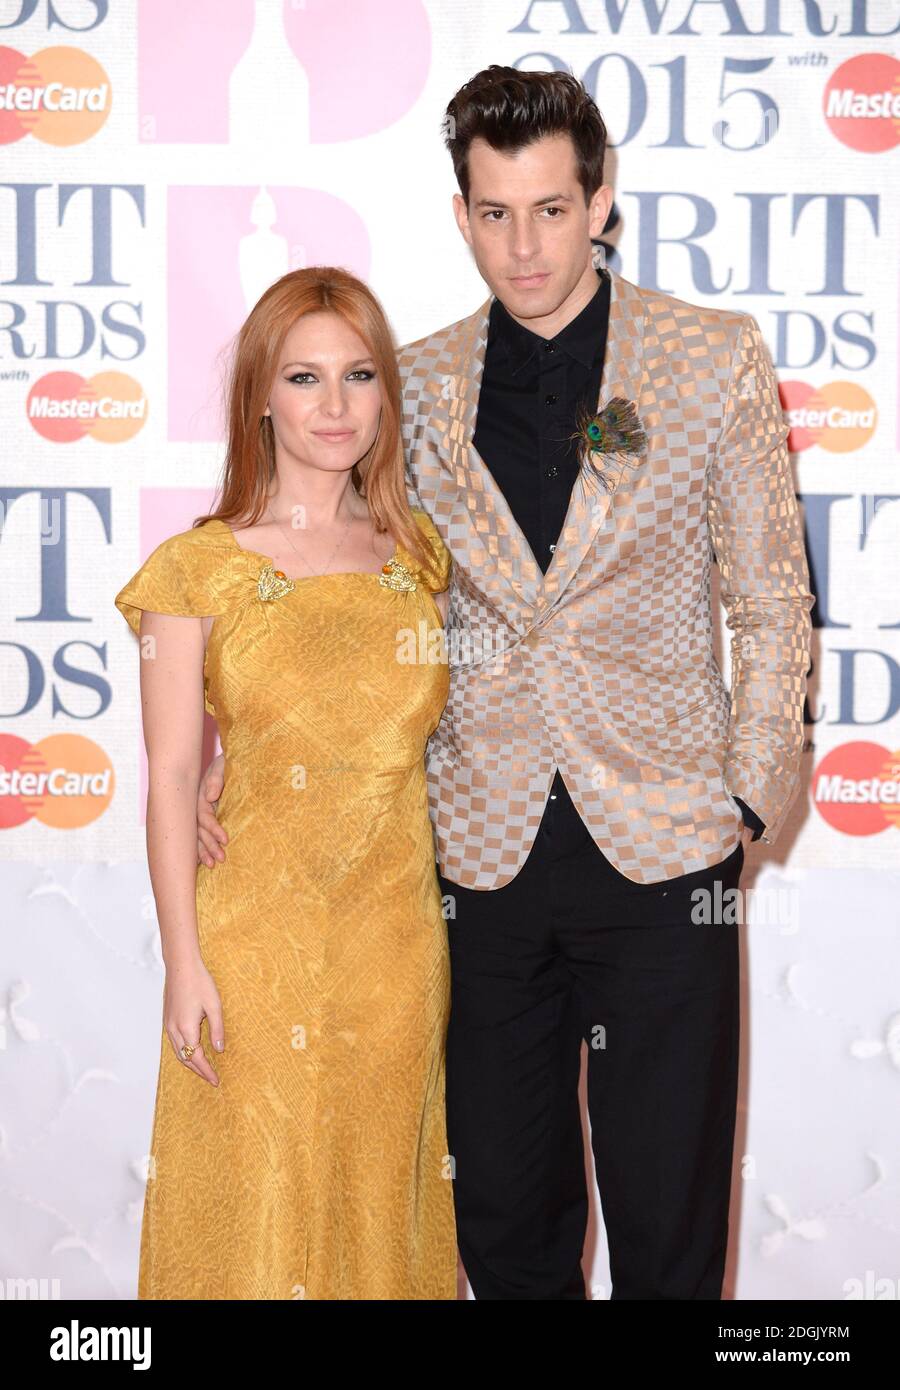 Mark Ronson and Josephine de La Baume attending the Brit Awards 2015 with MasterCard held at The O2 Arena, London Stock Photo